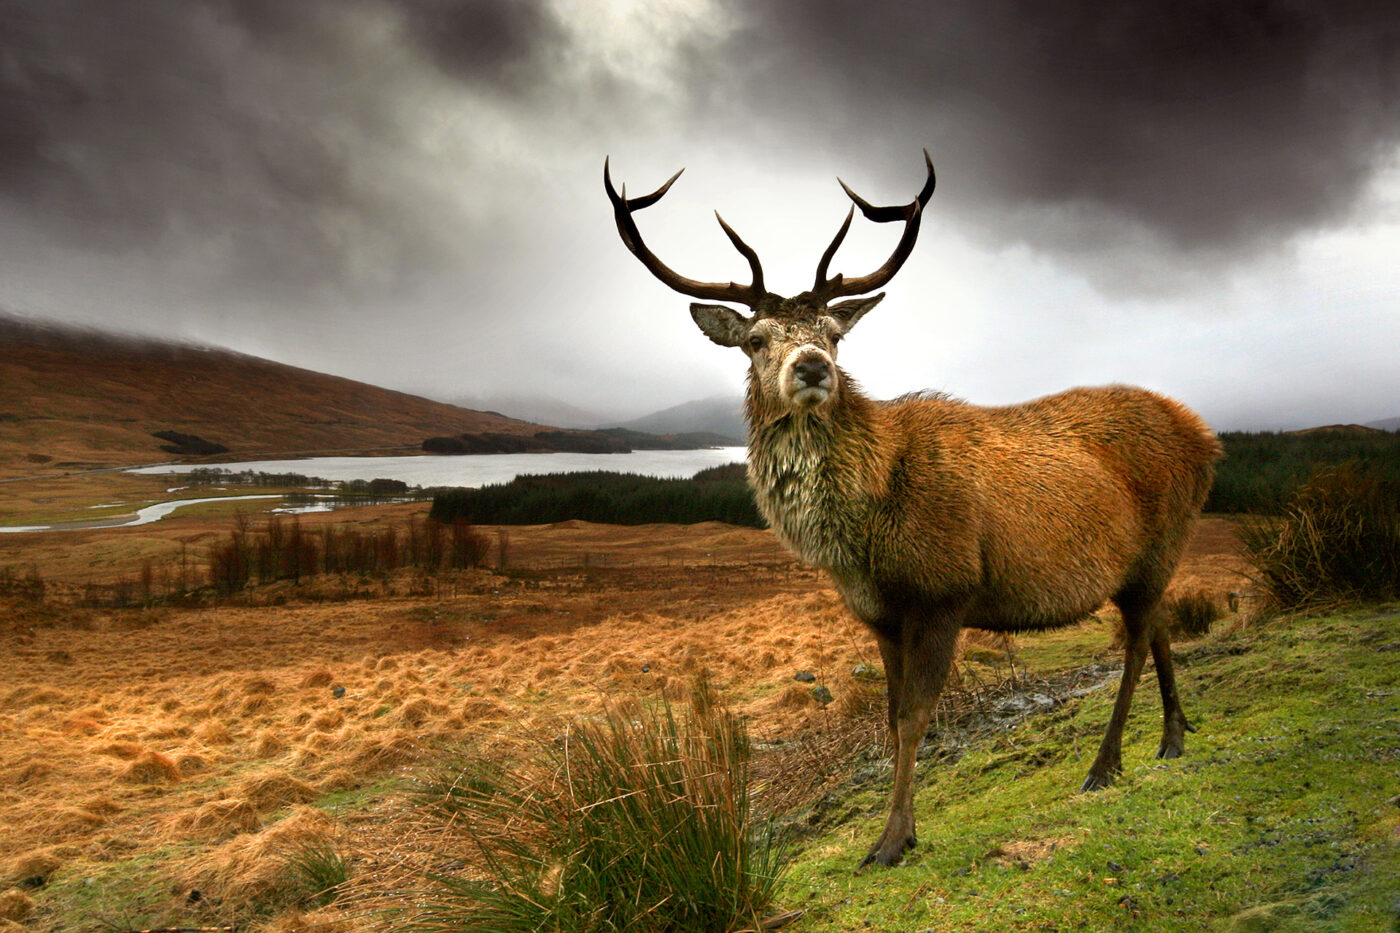 Red deer stag in Scotland